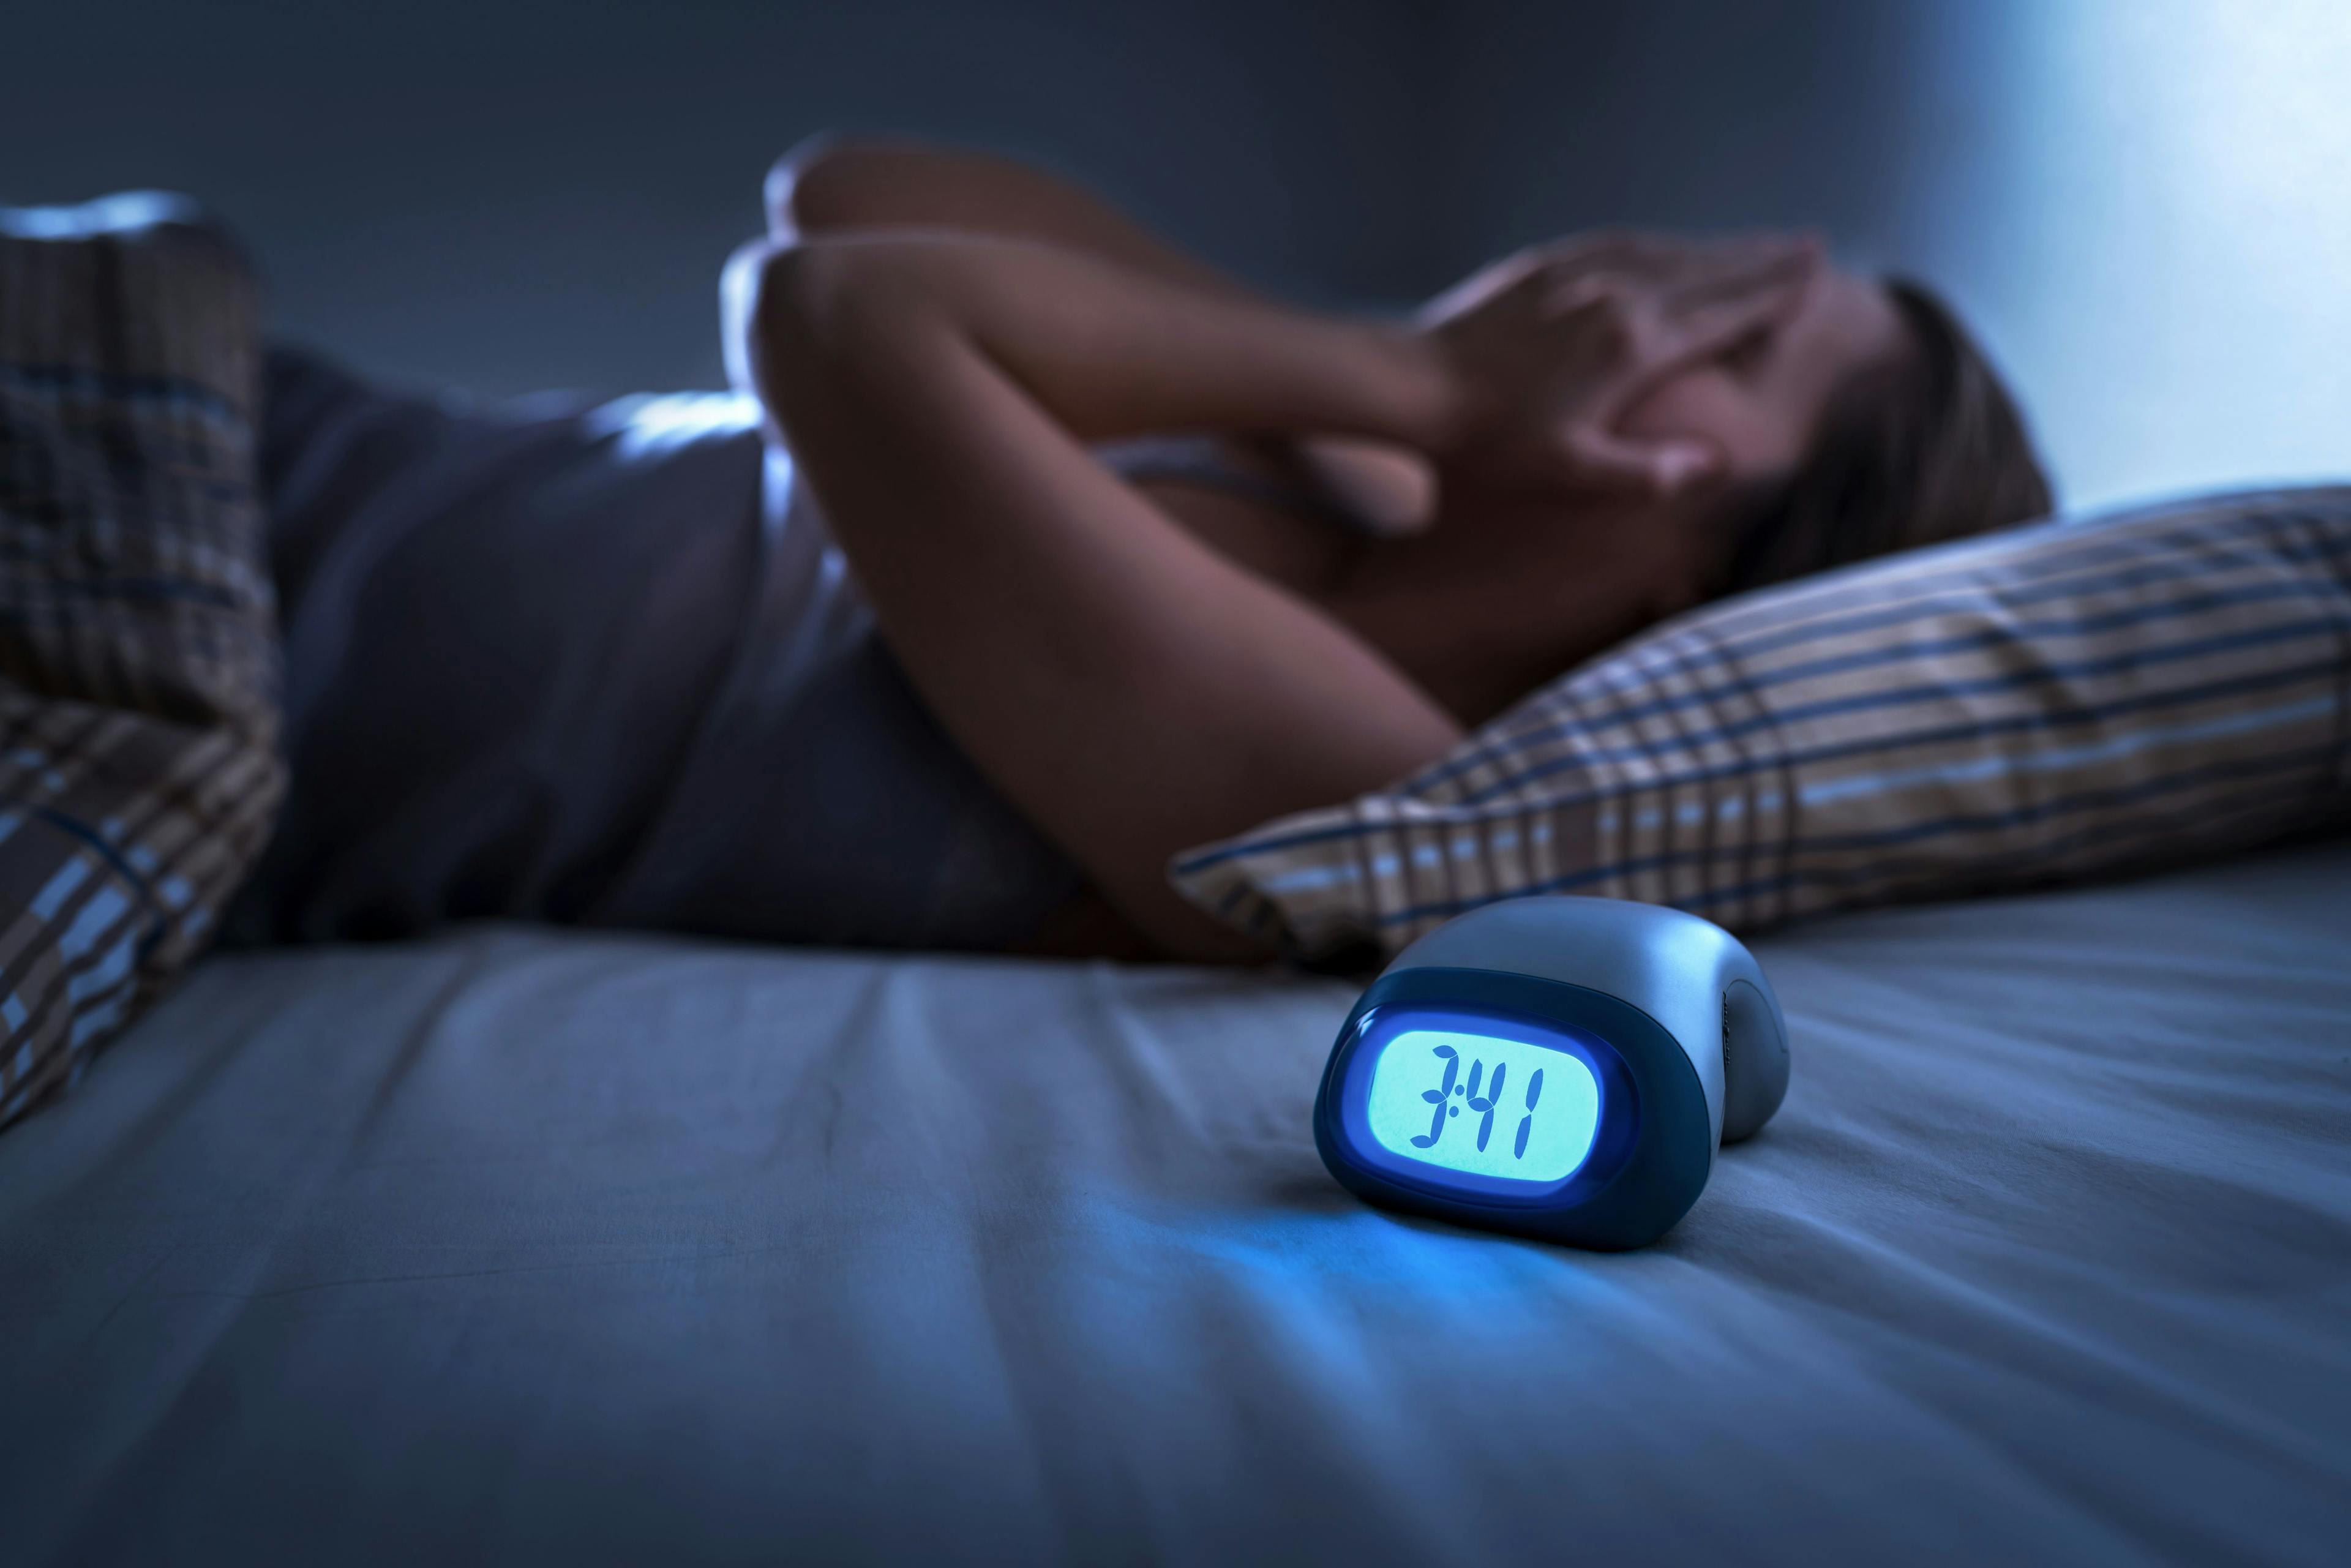 Sleepless woman suffering from insomnia, sleep apnea or stress. Tired and exhausted lady. Headache or migraine. Awake in the middle of the night. Frustrated person with problem. Alarm clock with time | Image Credit: terovesalainen - stock.adobe.com